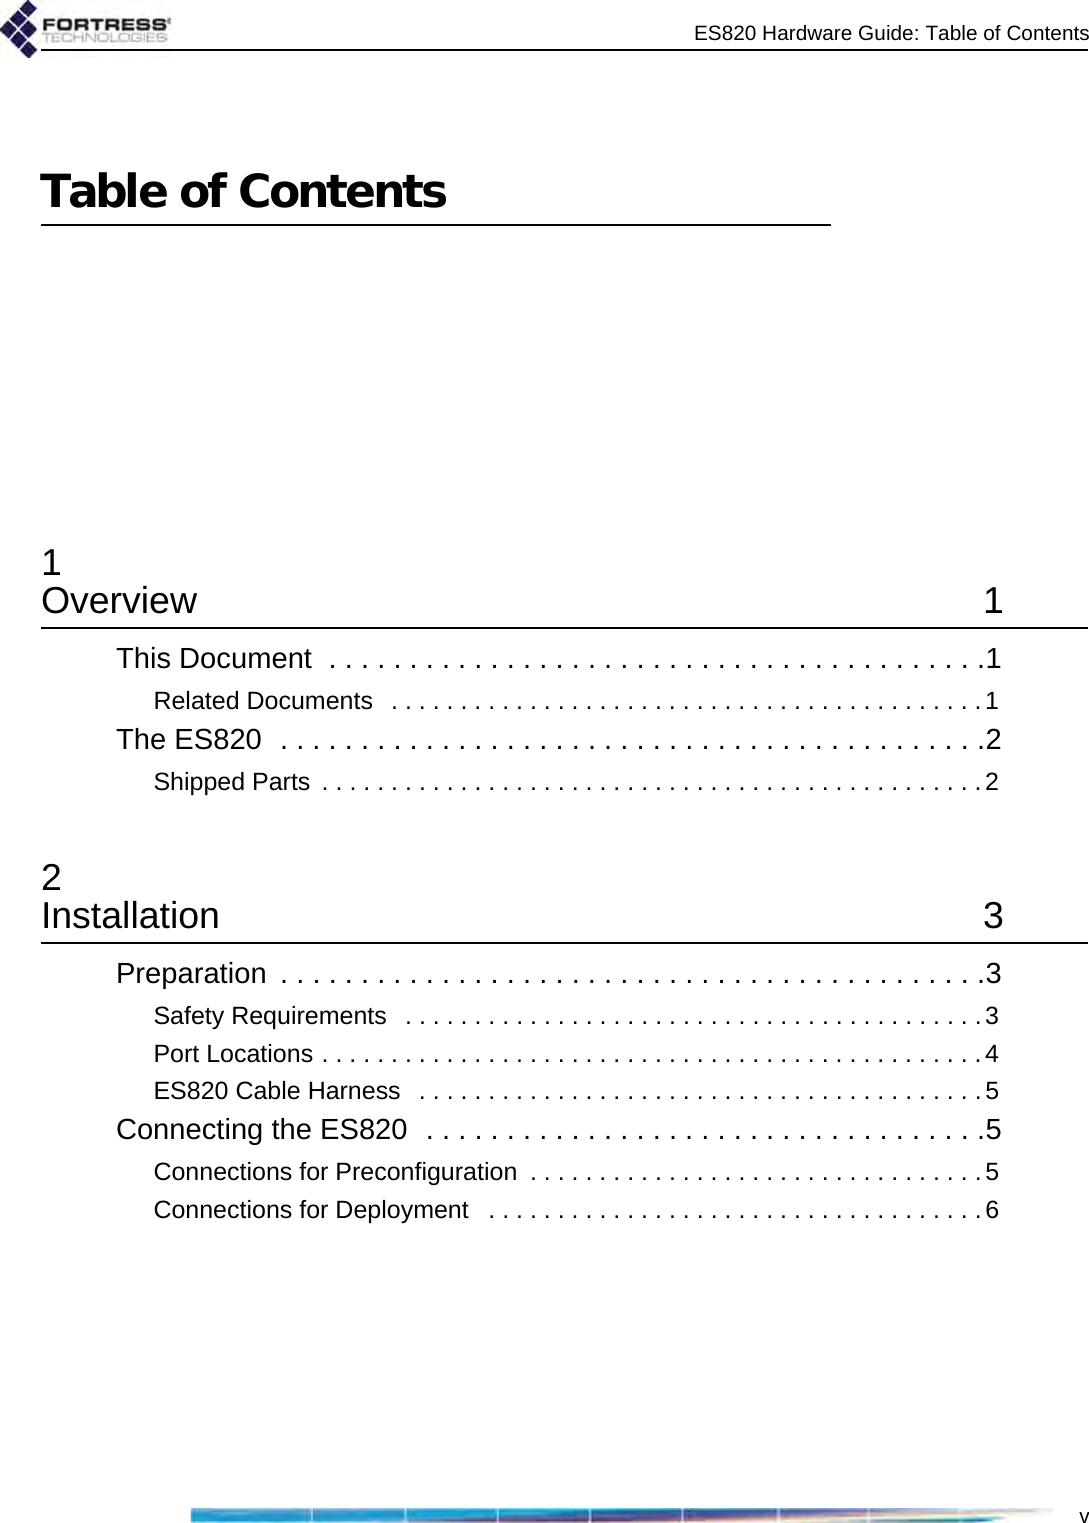 ES820 Hardware Guide: Table of ContentsvTable of Contents1Overview 1This Document  . . . . . . . . . . . . . . . . . . . . . . . . . . . . . . . . . . . . . . . . .1Related Documents   . . . . . . . . . . . . . . . . . . . . . . . . . . . . . . . . . . . . . . . . . . .1The ES820  . . . . . . . . . . . . . . . . . . . . . . . . . . . . . . . . . . . . . . . . . . . .2Shipped Parts  . . . . . . . . . . . . . . . . . . . . . . . . . . . . . . . . . . . . . . . . . . . . . . . .22Installation 3Preparation  . . . . . . . . . . . . . . . . . . . . . . . . . . . . . . . . . . . . . . . . . . . .3Safety Requirements   . . . . . . . . . . . . . . . . . . . . . . . . . . . . . . . . . . . . . . . . . .3Port Locations . . . . . . . . . . . . . . . . . . . . . . . . . . . . . . . . . . . . . . . . . . . . . . . .4ES820 Cable Harness   . . . . . . . . . . . . . . . . . . . . . . . . . . . . . . . . . . . . . . . . .5Connecting the ES820  . . . . . . . . . . . . . . . . . . . . . . . . . . . . . . . . . . .5Connections for Preconfiguration  . . . . . . . . . . . . . . . . . . . . . . . . . . . . . . . . . 5Connections for Deployment   . . . . . . . . . . . . . . . . . . . . . . . . . . . . . . . . . . . .6